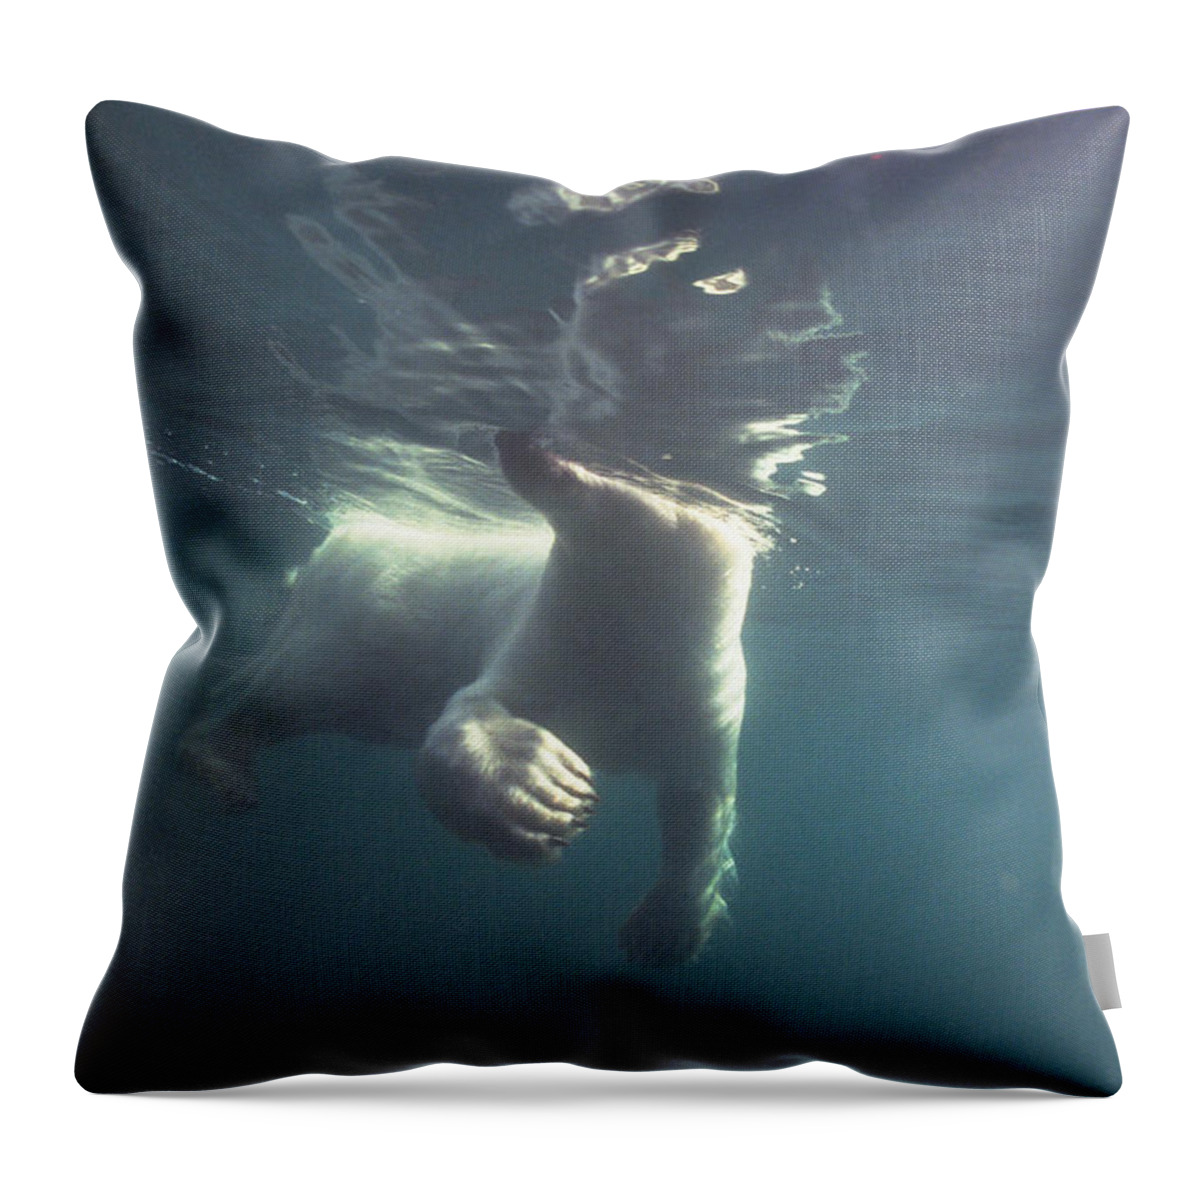 00125874 Throw Pillow featuring the photograph Polar Bear Swimming Wager Bay Canada by Flip Nicklin